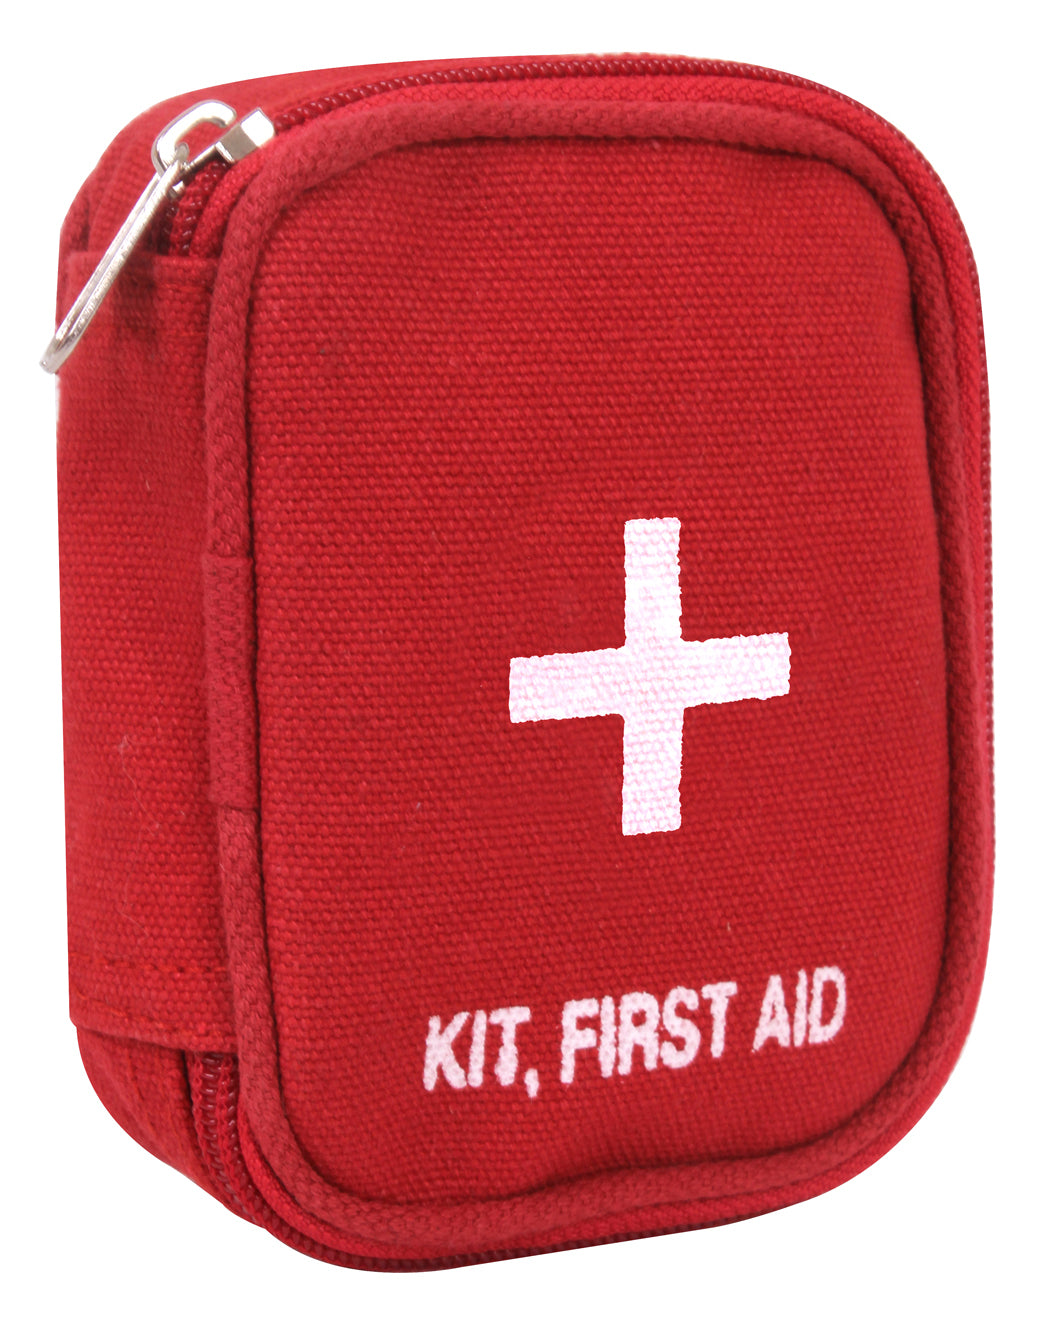 Milspec Military Zipper First Aid Kit Pouch First Aid Supplies & Snake Bite Kits MilTac Tactical Military Outdoor Gear Australia